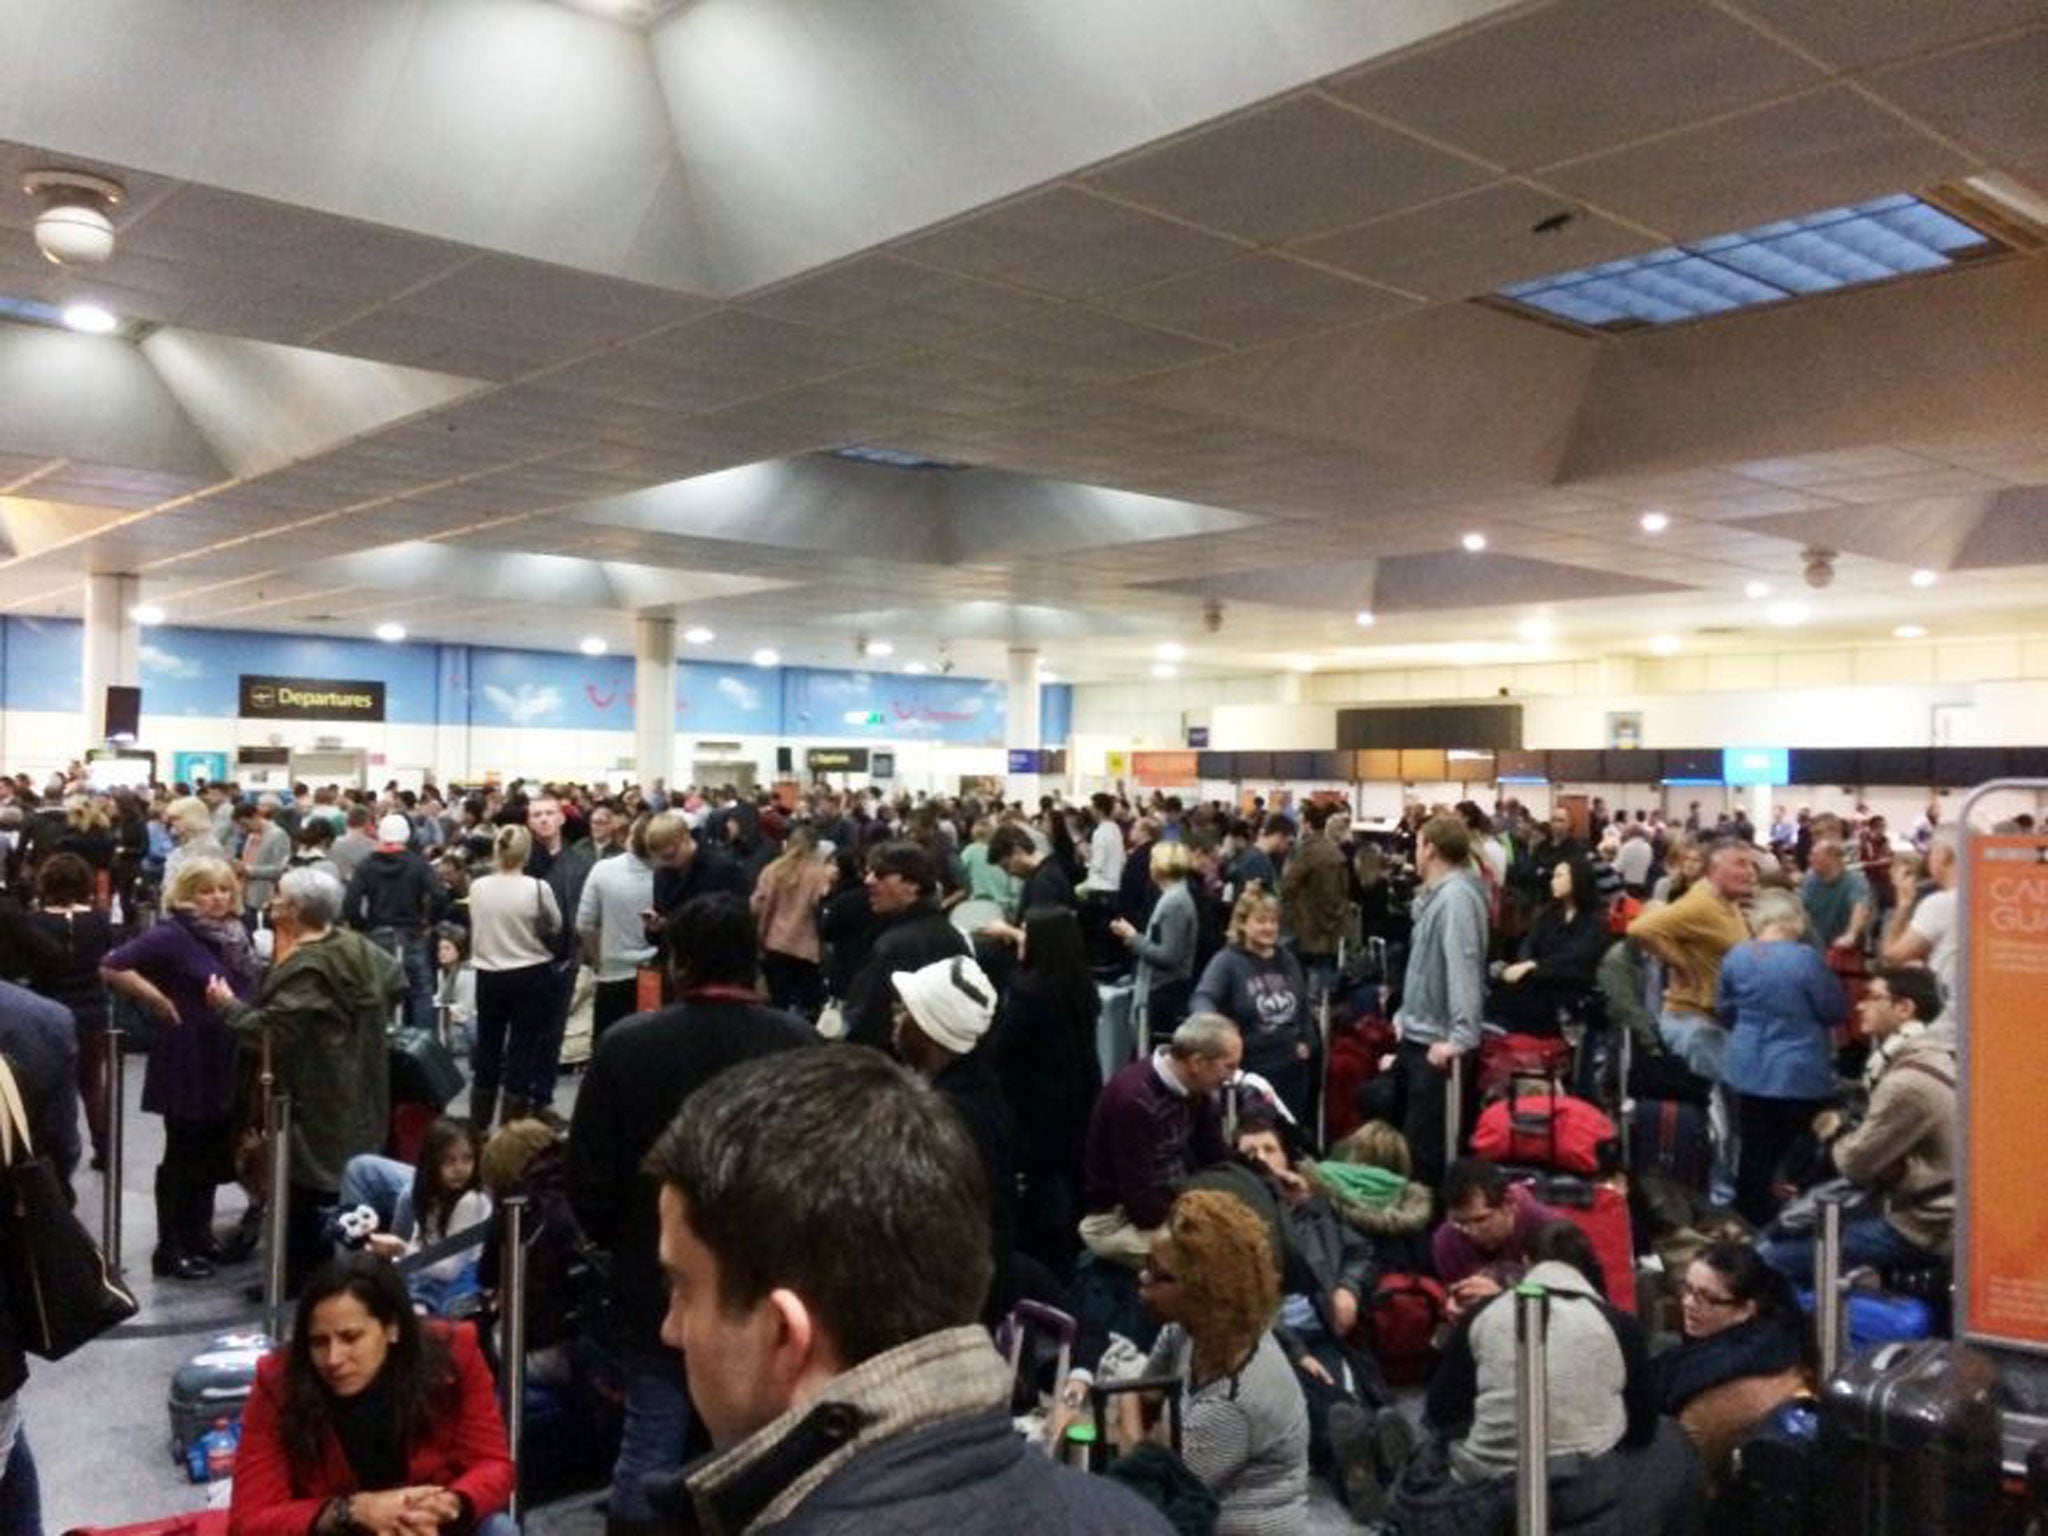 Passengers waiting at the North Terminal at Gatwick Airport, as passengers were left 'in limbo' at the airport's North Terminal as a power outage added to the travel misery felt across the country